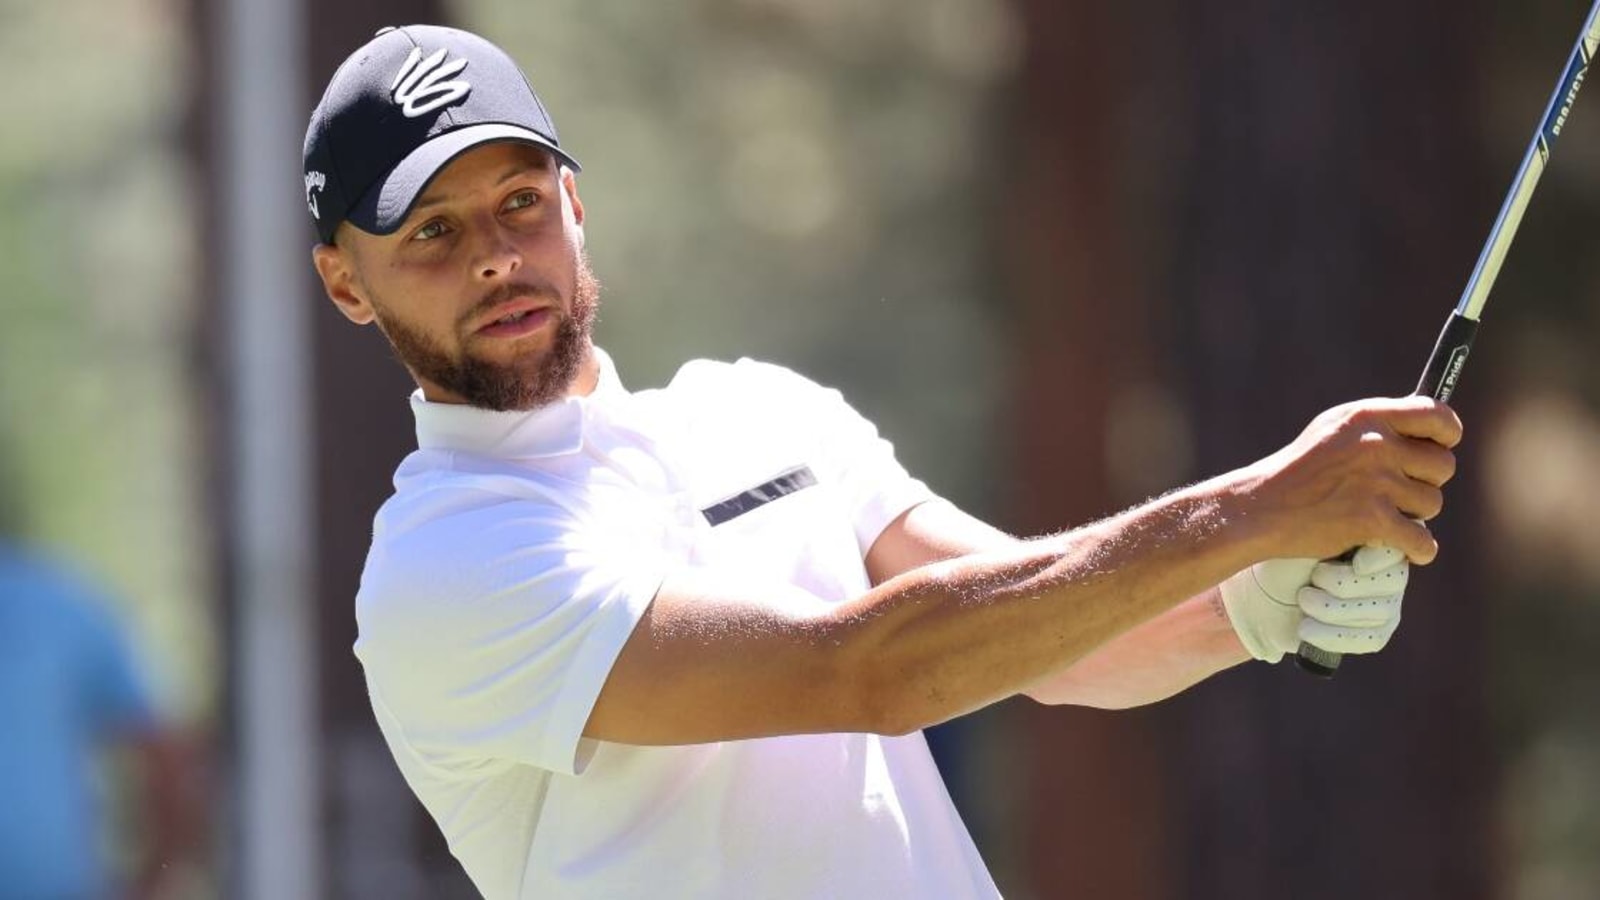 Steph Curry wins American Century Championship after fan yells during Mardy Fish’s swing